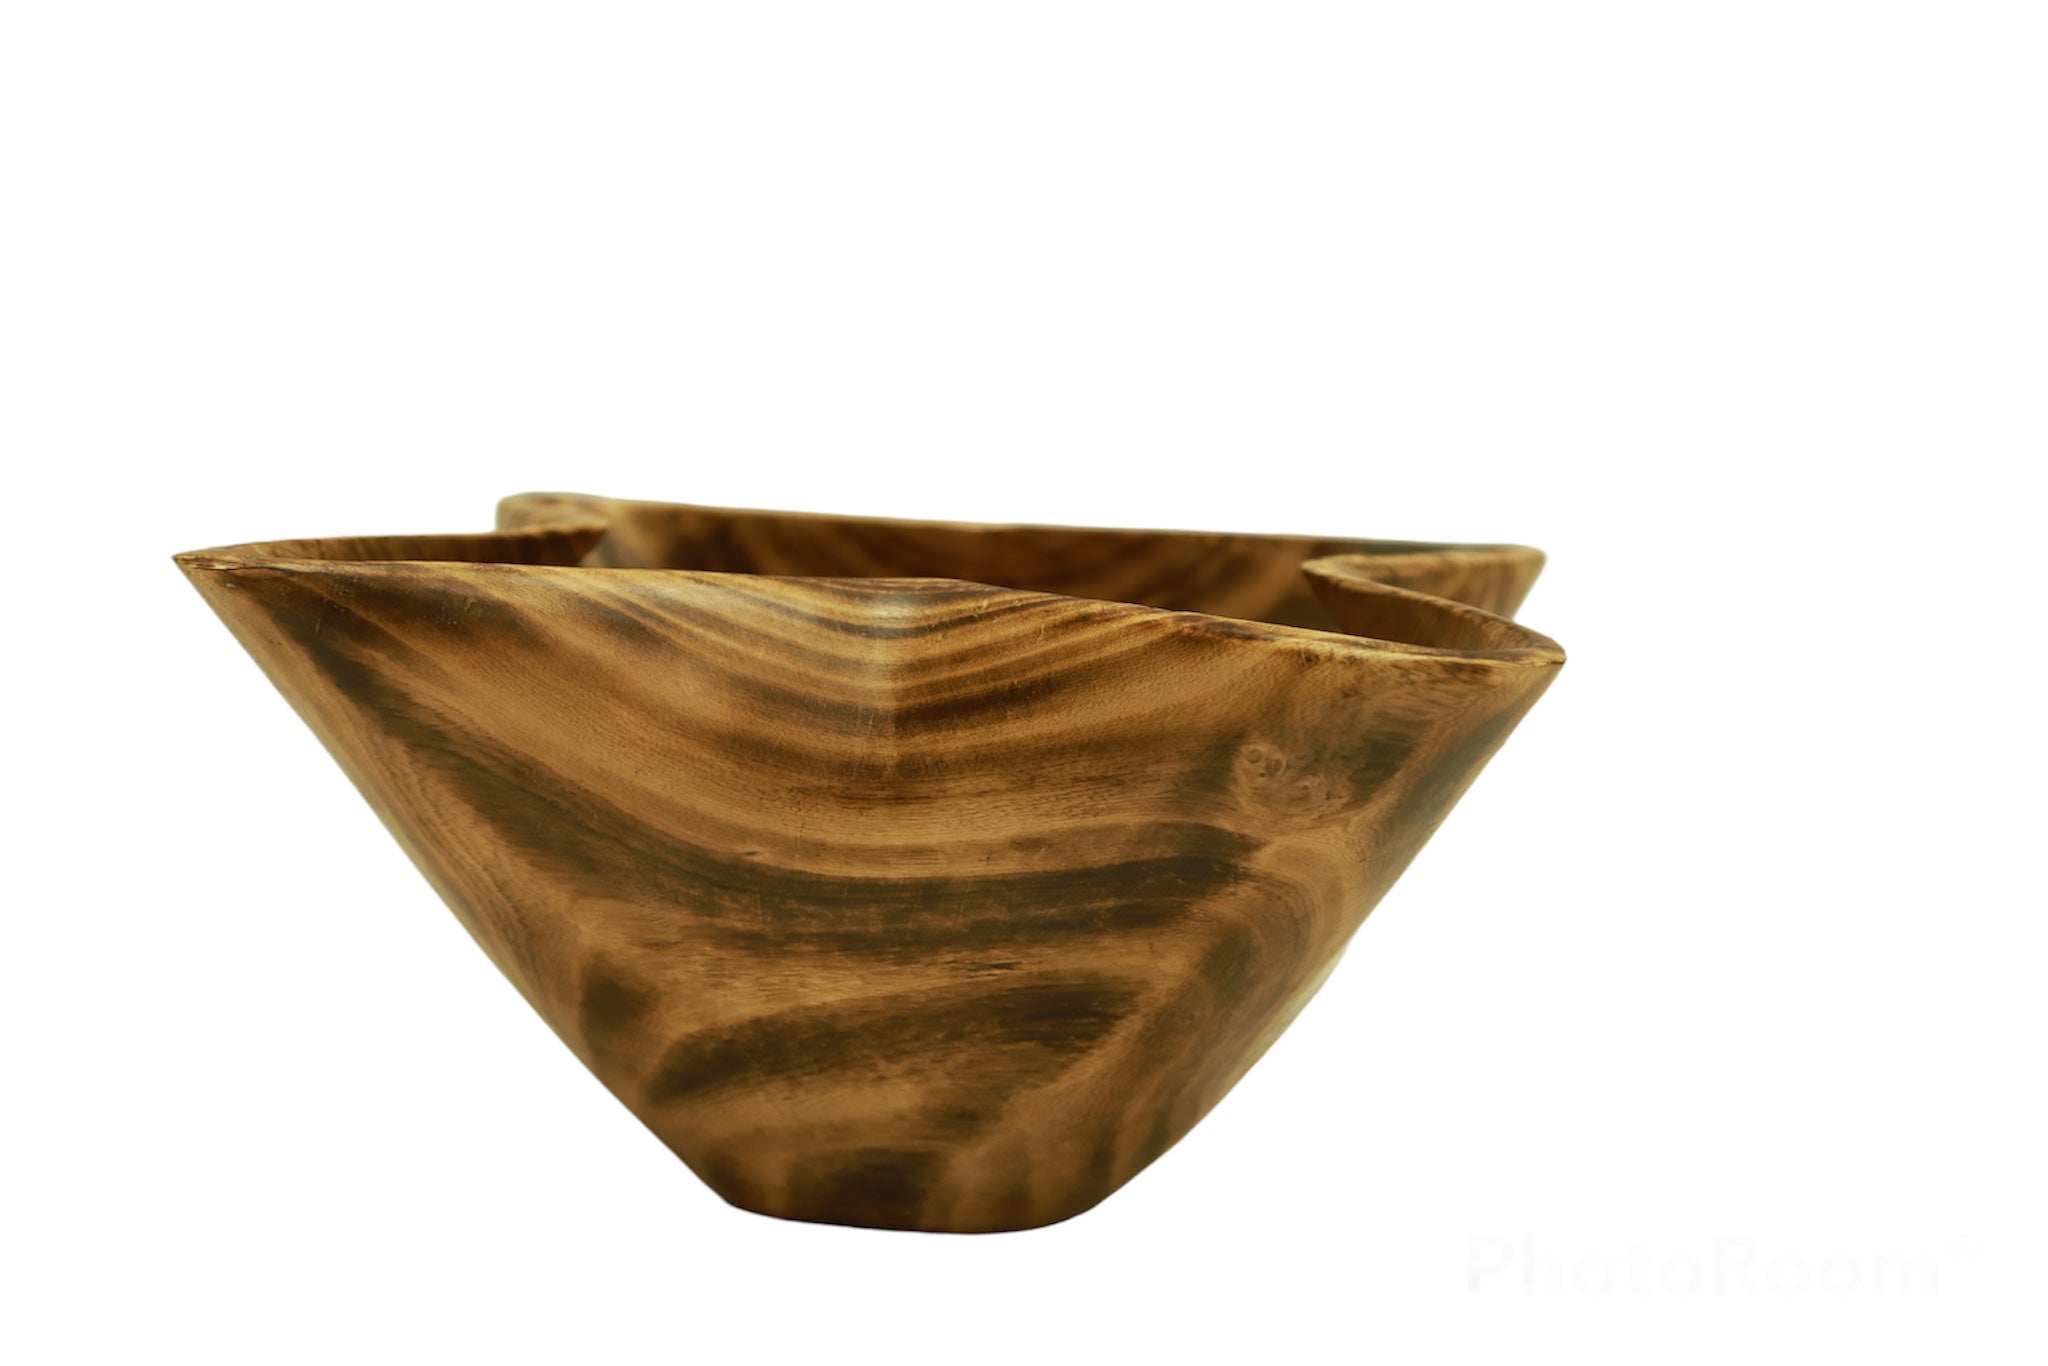 Wavy Square Jacaranda Salad Bowl, Hand carved Bowl, Wooden Bowl, Special gift - Tobmarc Home Decor & Gifts 